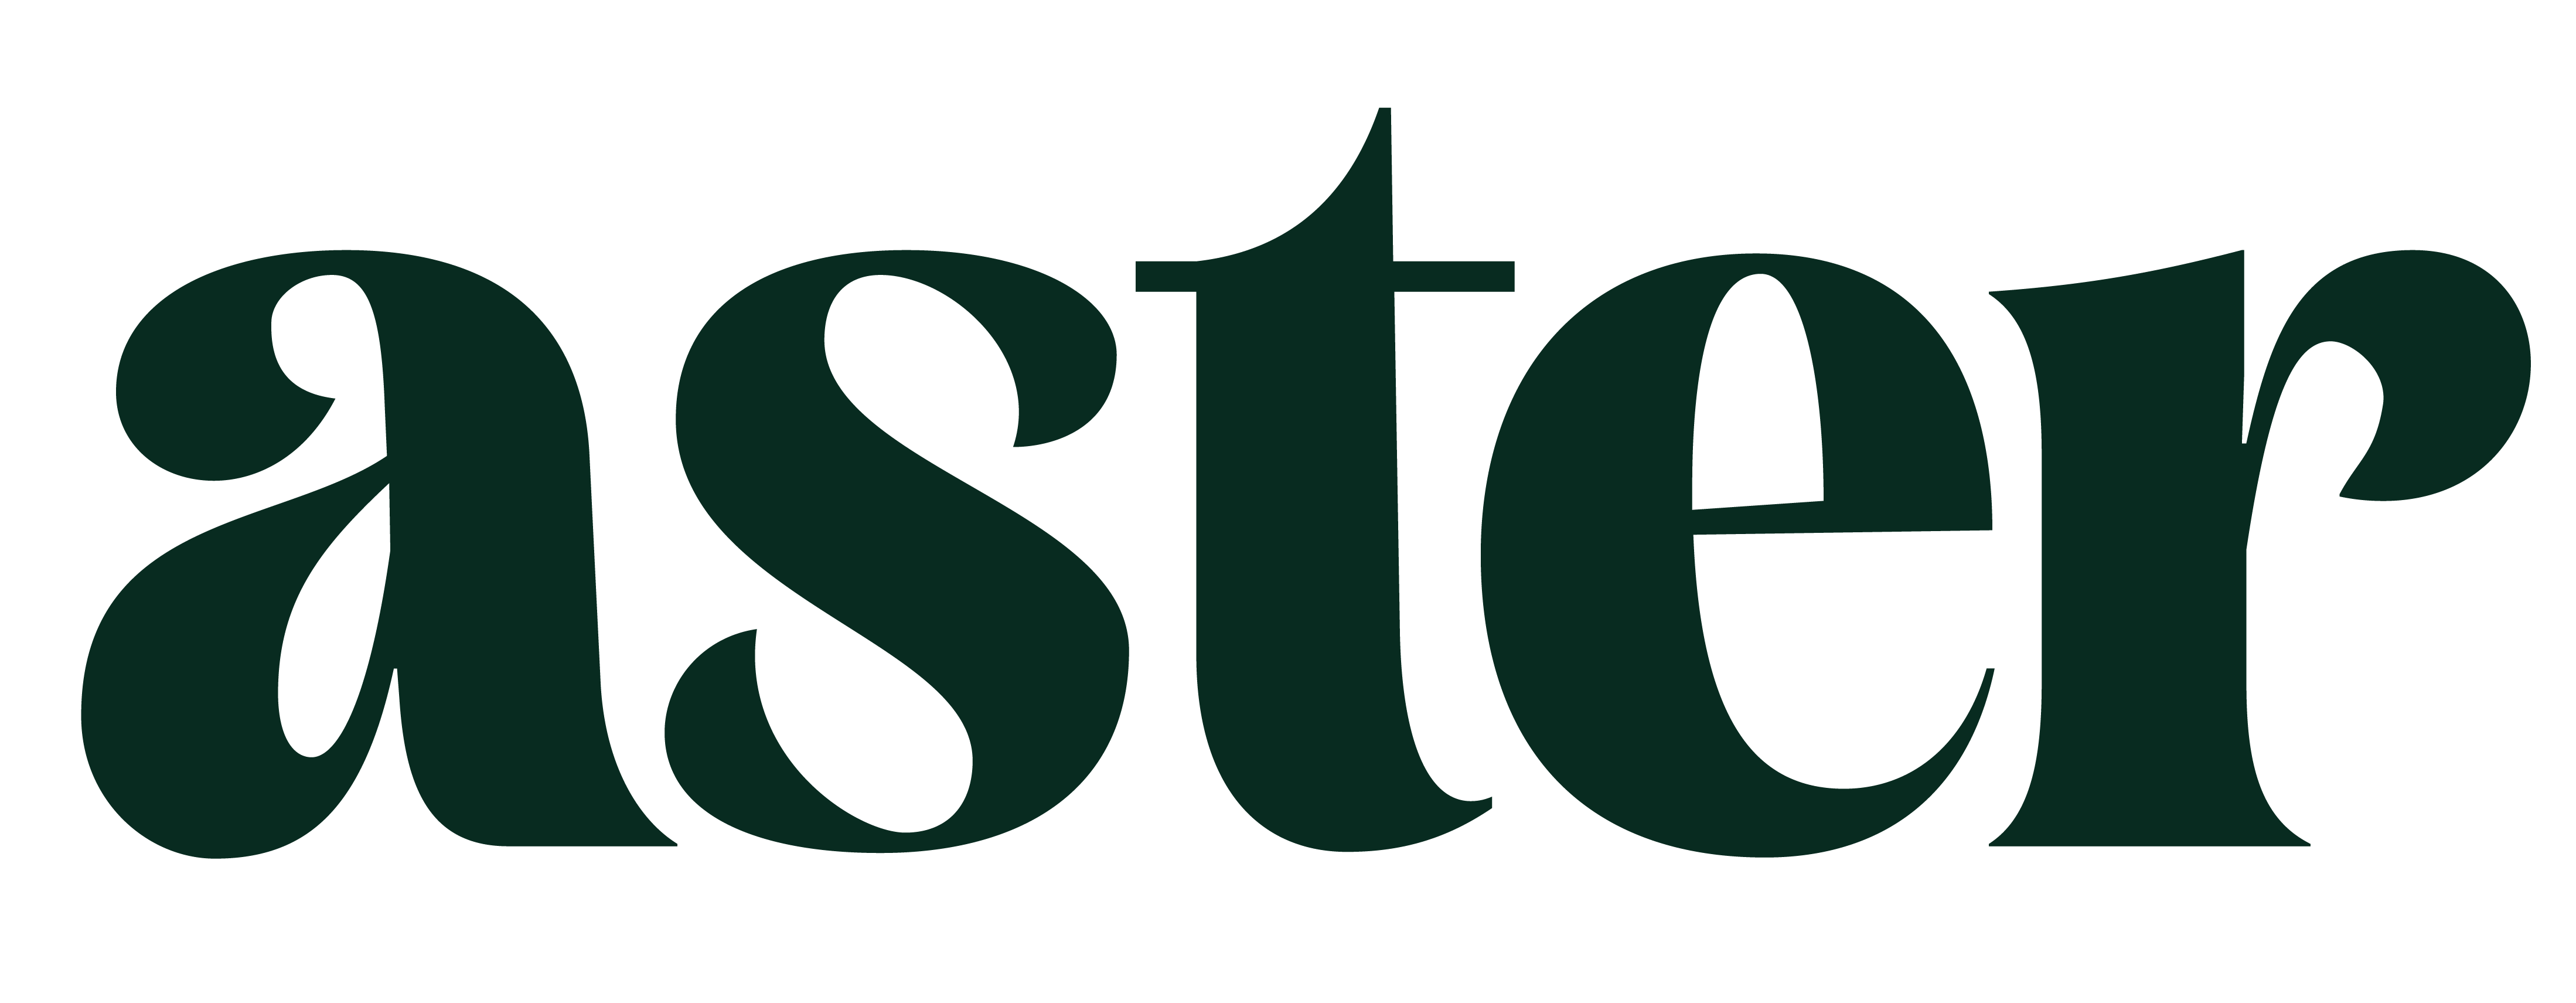 The logo of Aster